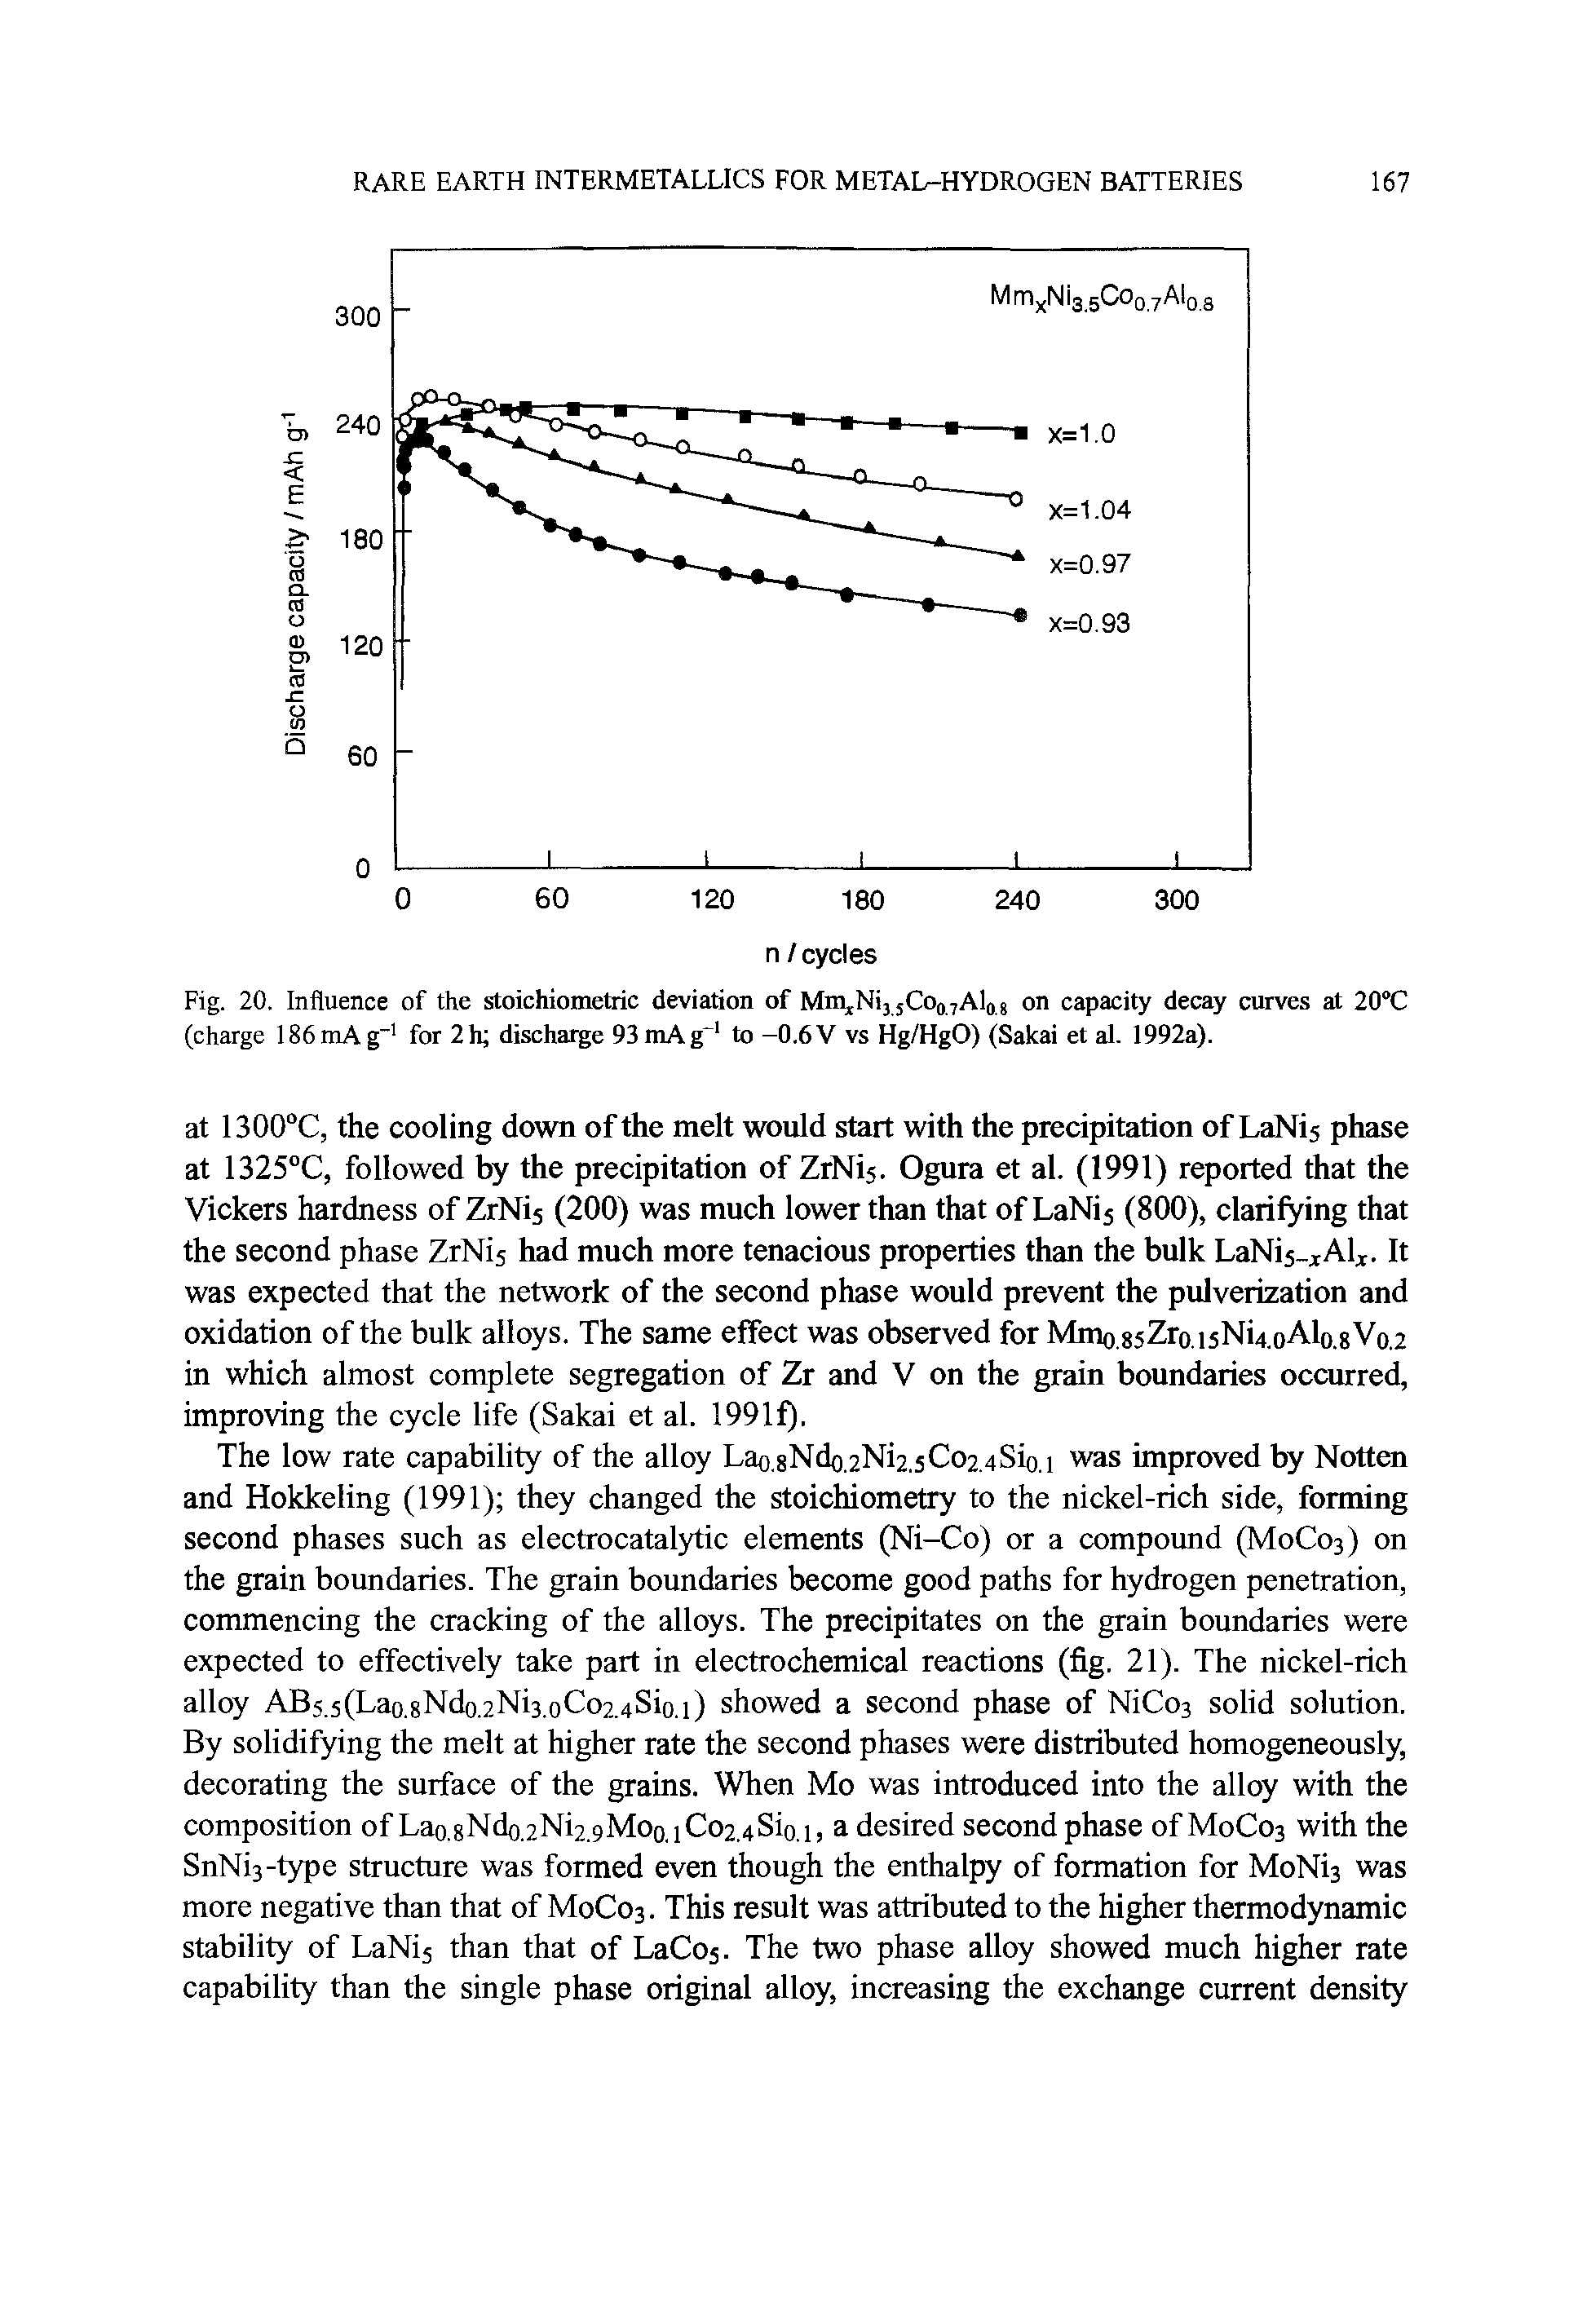 Fig. 20. Influence of the stoichiometric deviation of MiihNij.sCoojAIo j on capacity decay curves at 20"C (charge 186mAg for 2h discharge 93 mAg to -0.6 V vs Hg/HgO) (Sakai et al. 1992a).